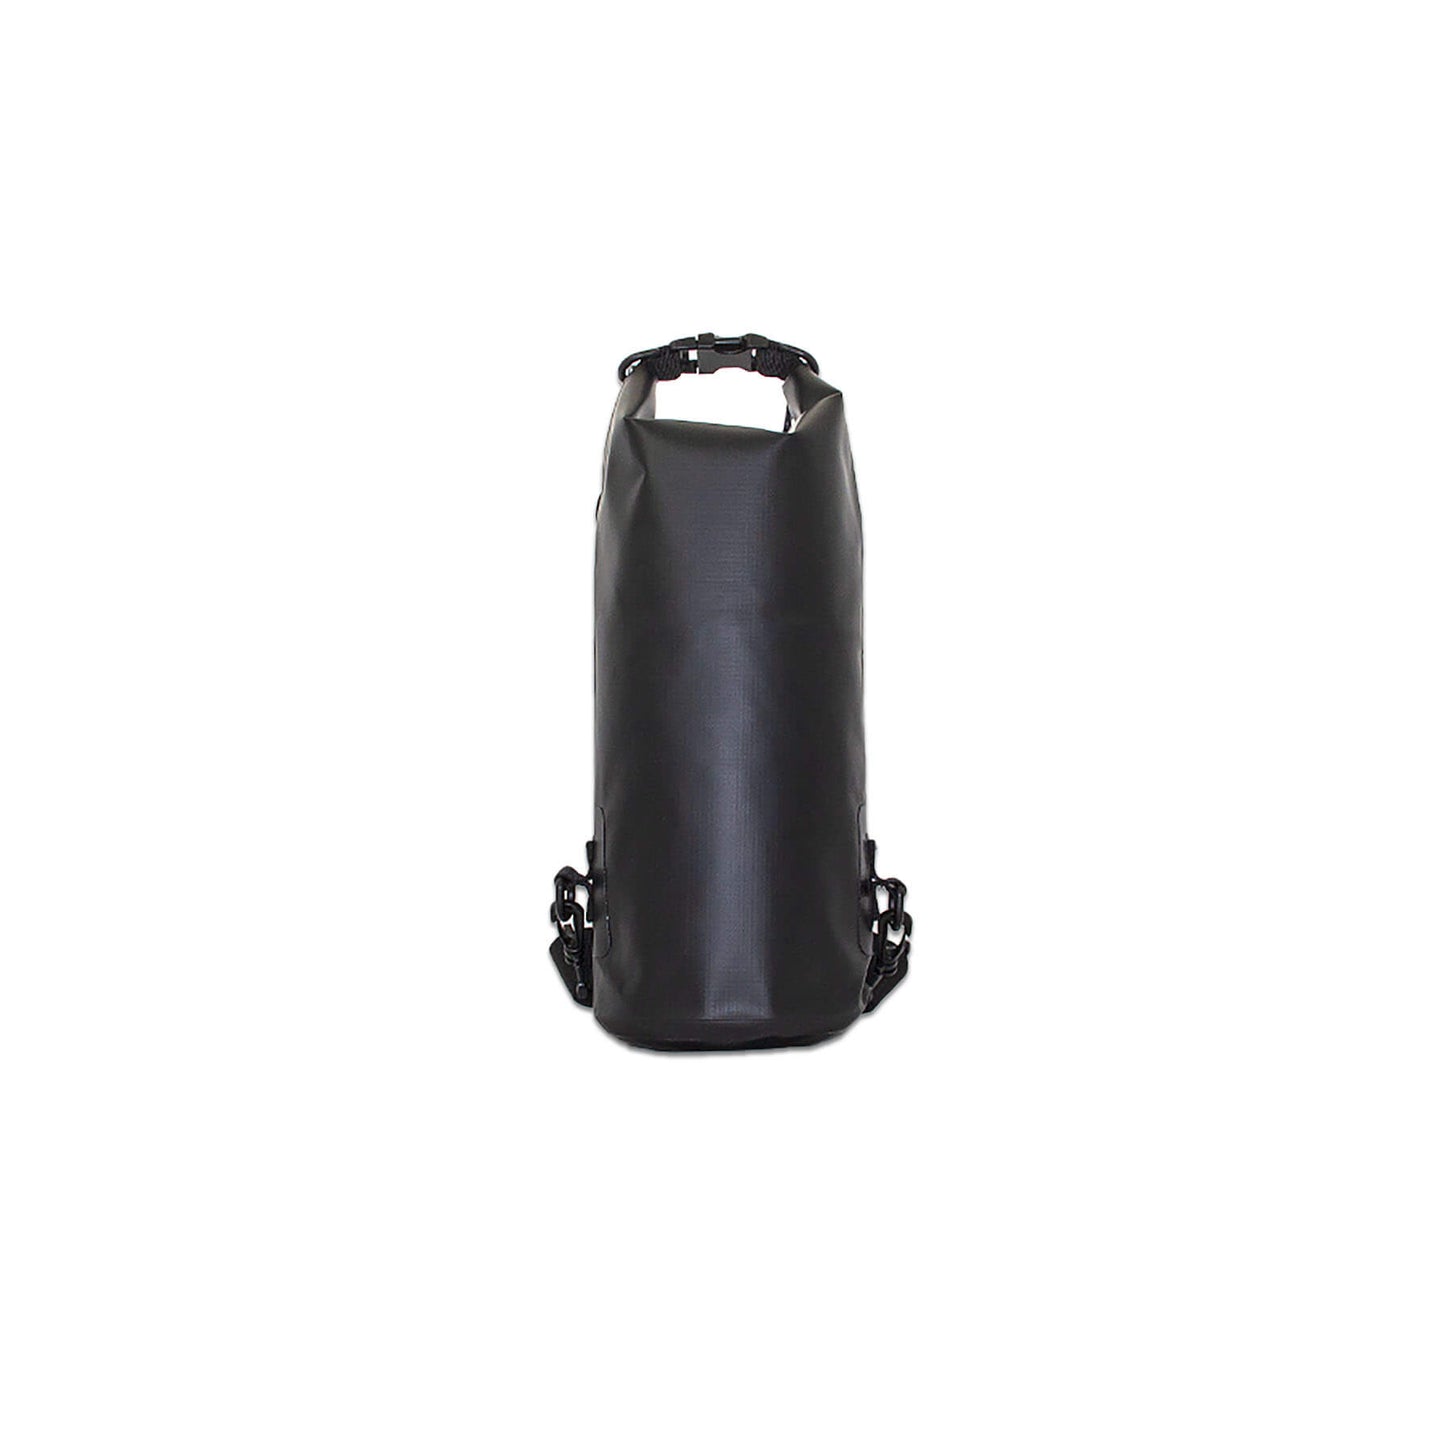 waterproof dry bag 5 litres a handy grab size with detachable straps and carabiner  in black the view of the front